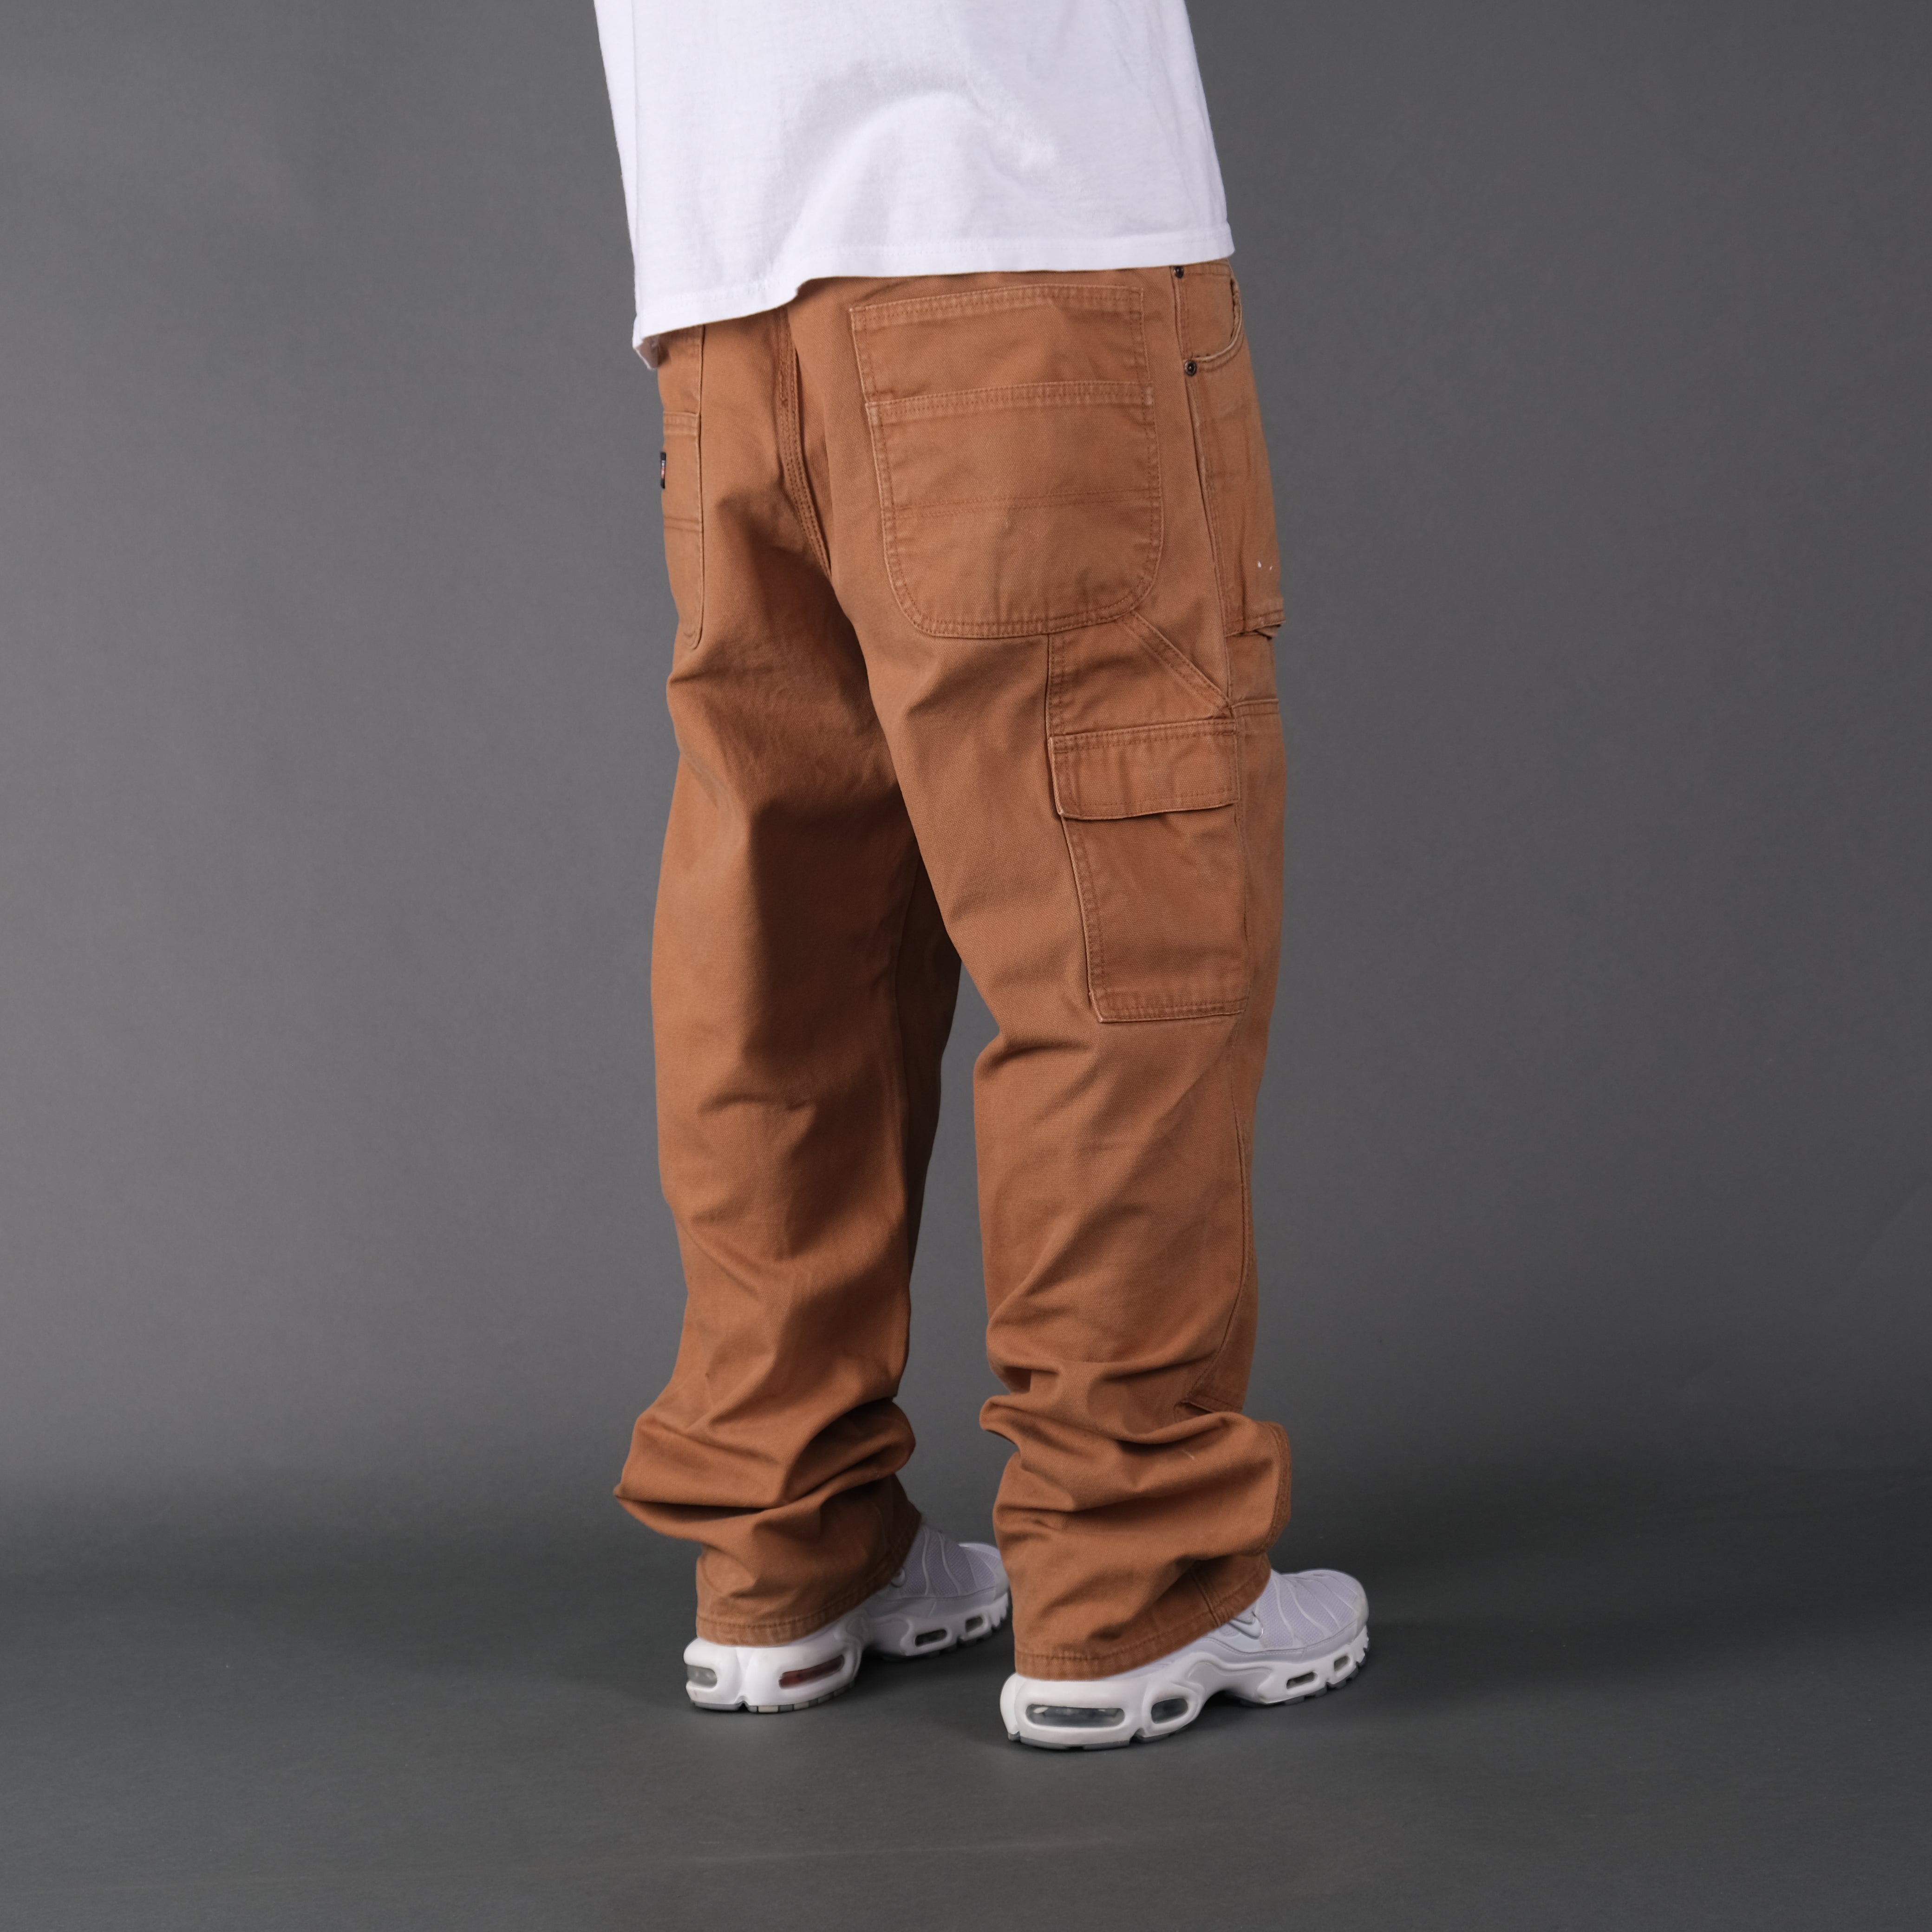 Vintage Dickies Carpenter Jeans in tan. – thebreadandbuttercollection